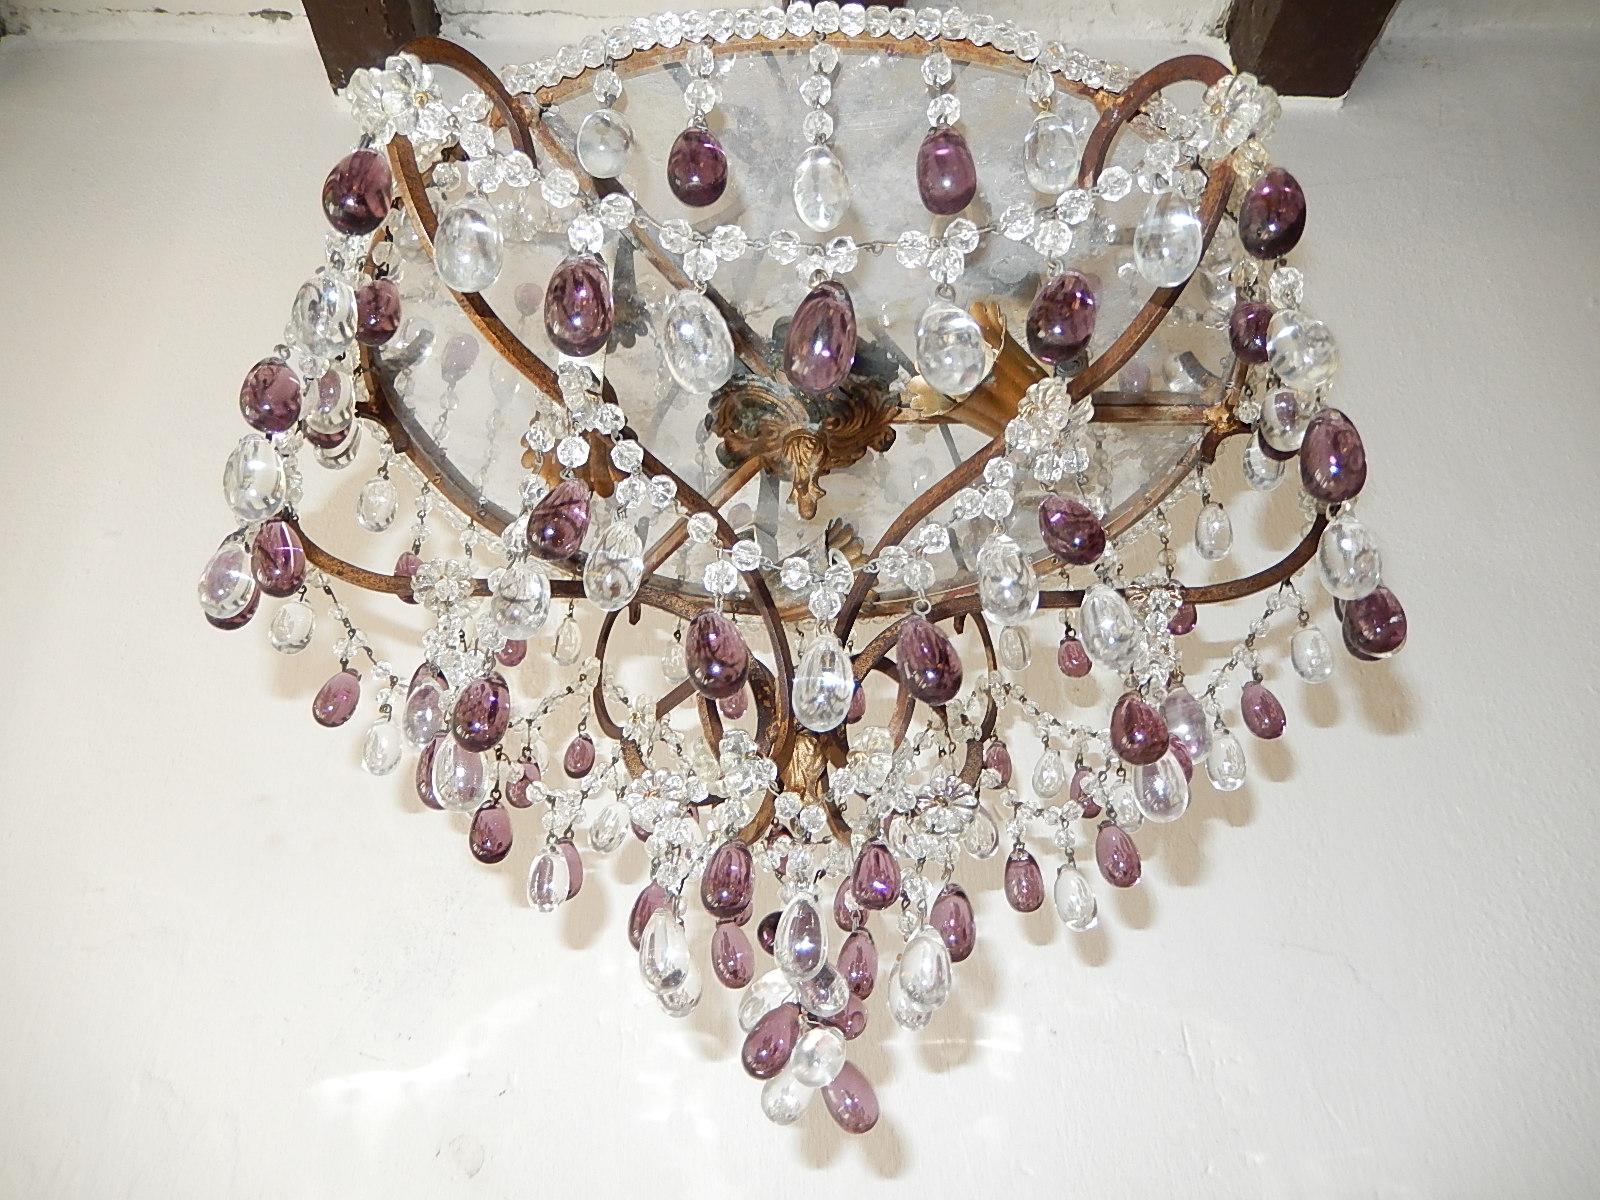 Rewired and ready to hang. Housing three lights under shiny silver to reflect even more light. Beading on top. Swags of vintage rock crystals with Murano drops in clear and amethyst throughout. Florets and a beautiful finial. Free priority shipping